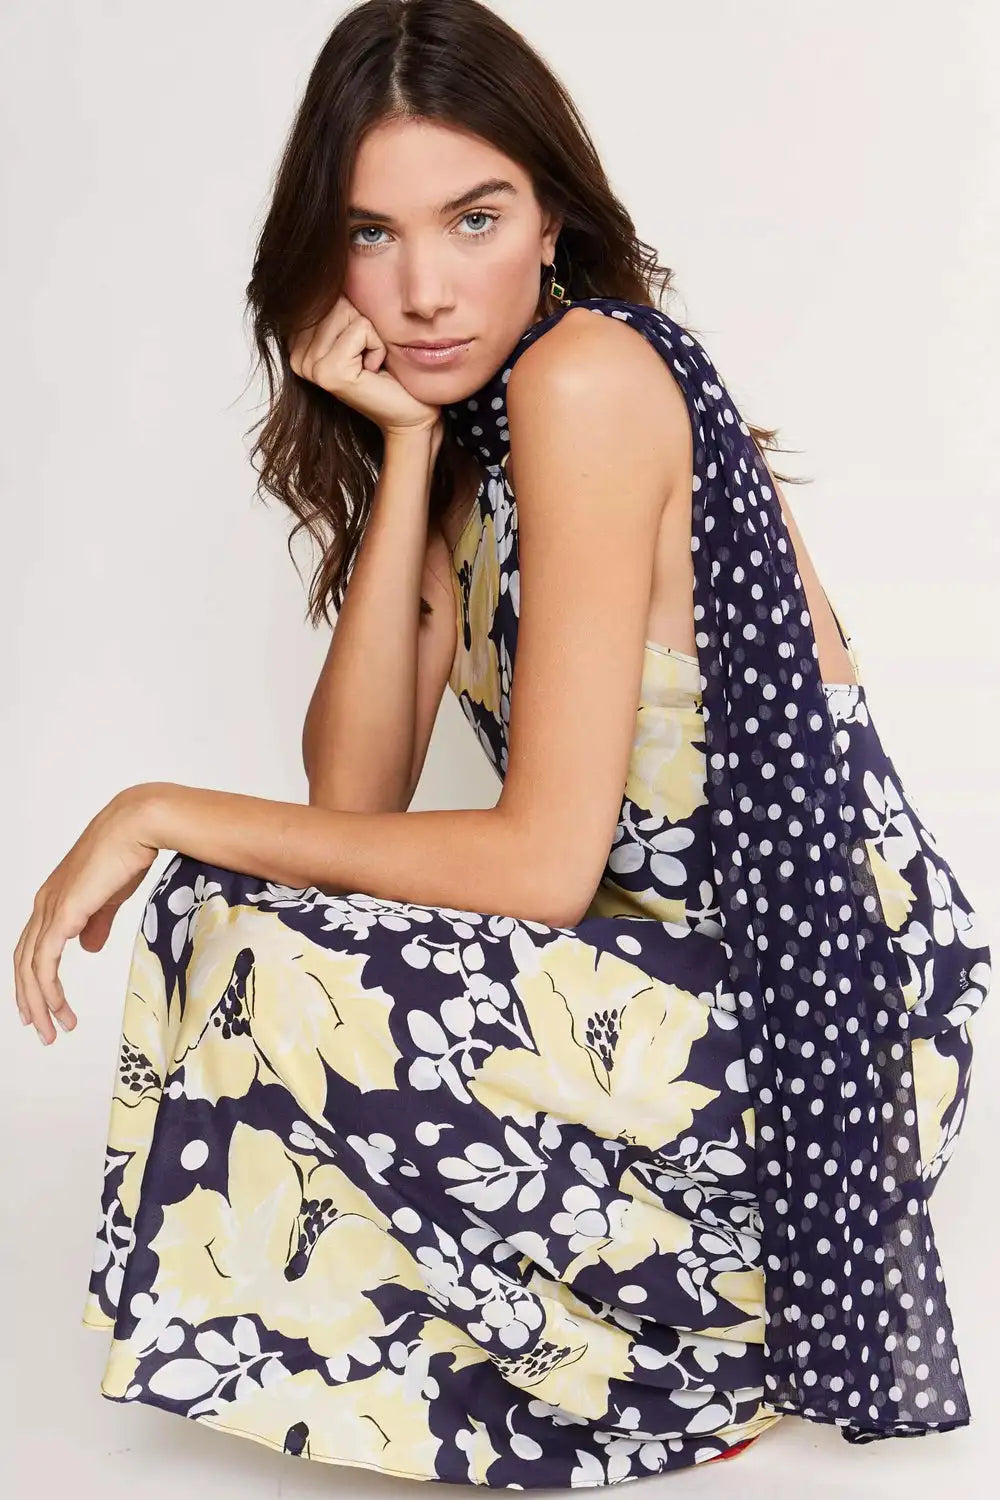 This Dress Blue Hailey is made from high quality materials and features a colorful printed skirt designed by a skilled designer. Each dress is meticulously handmade with intricate needle and thread work, ensuring a long-lasting and unique piece. Elevate your wardrobe with this must-have statement dress.